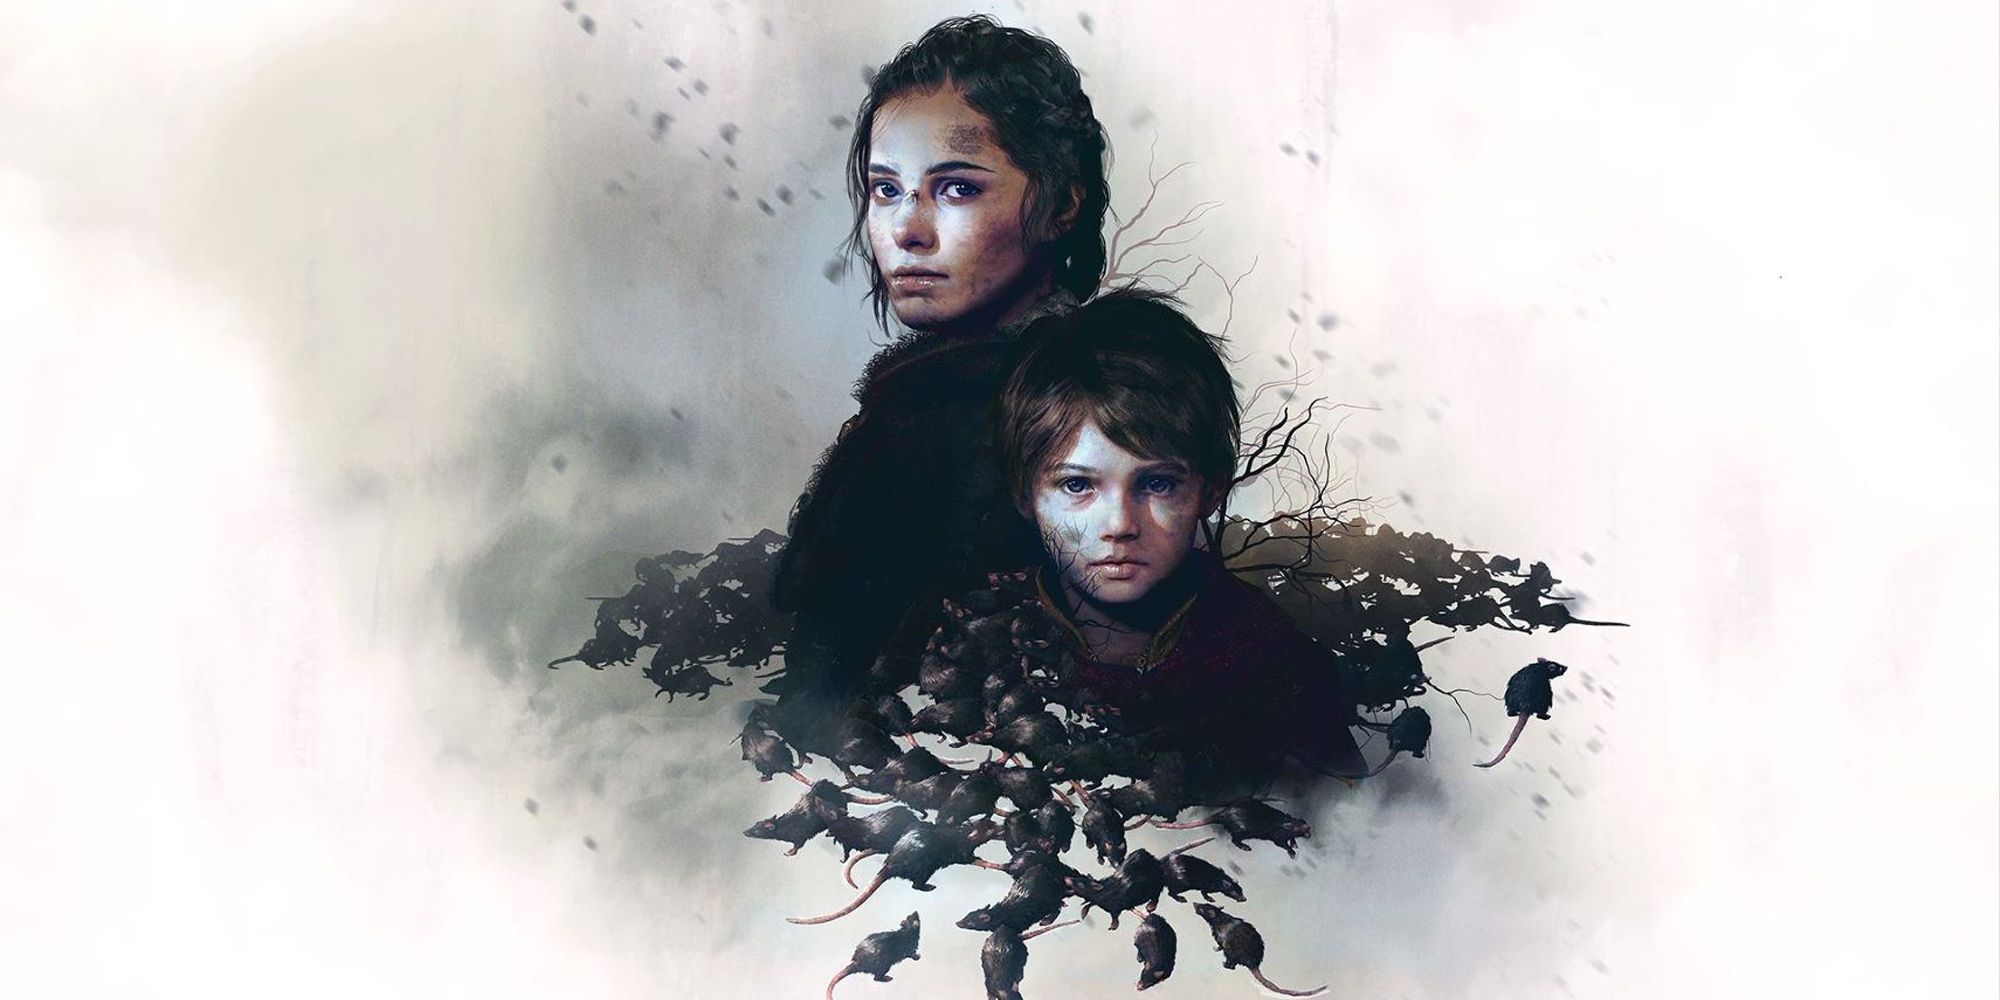 A plague tale innocence poster image